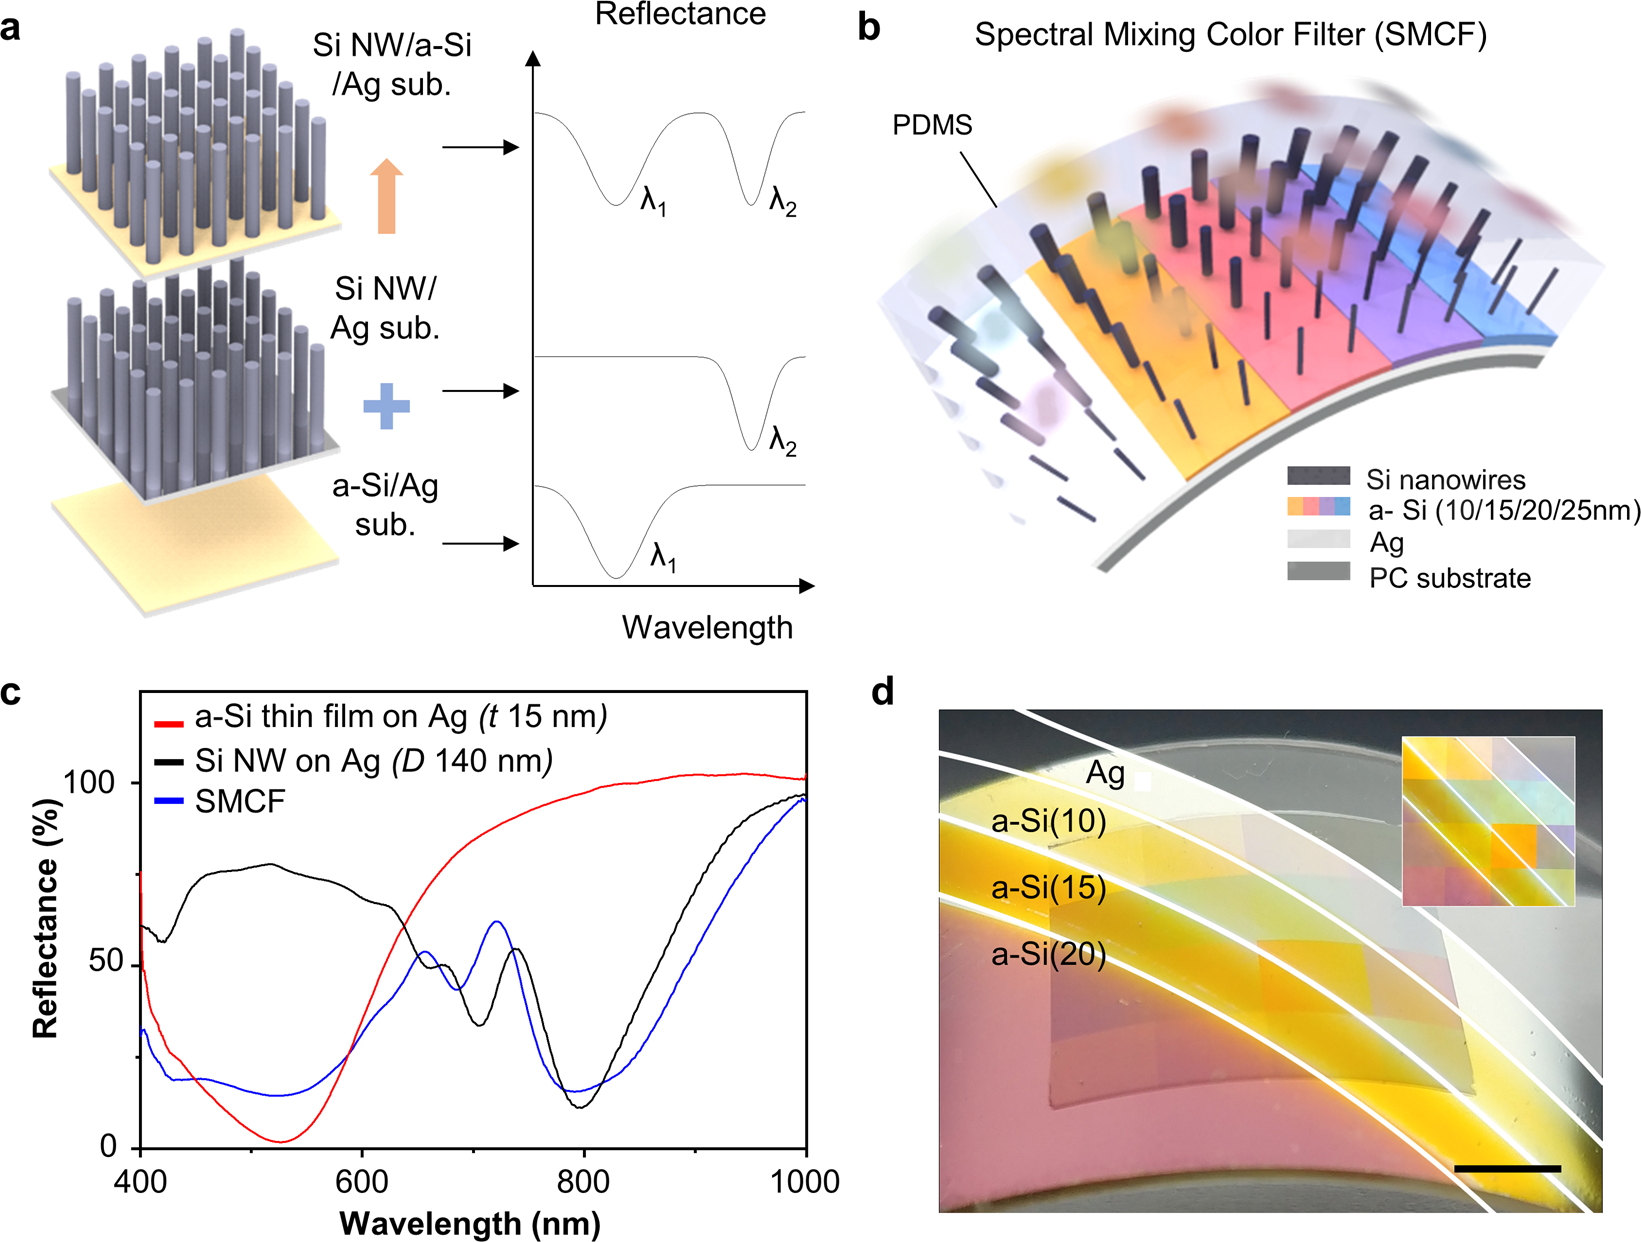 Reflective color filter precise control of the color coordinate achieved stacking silicon nanowire arrays onto ultrathin optical coatings | Scientific Reports